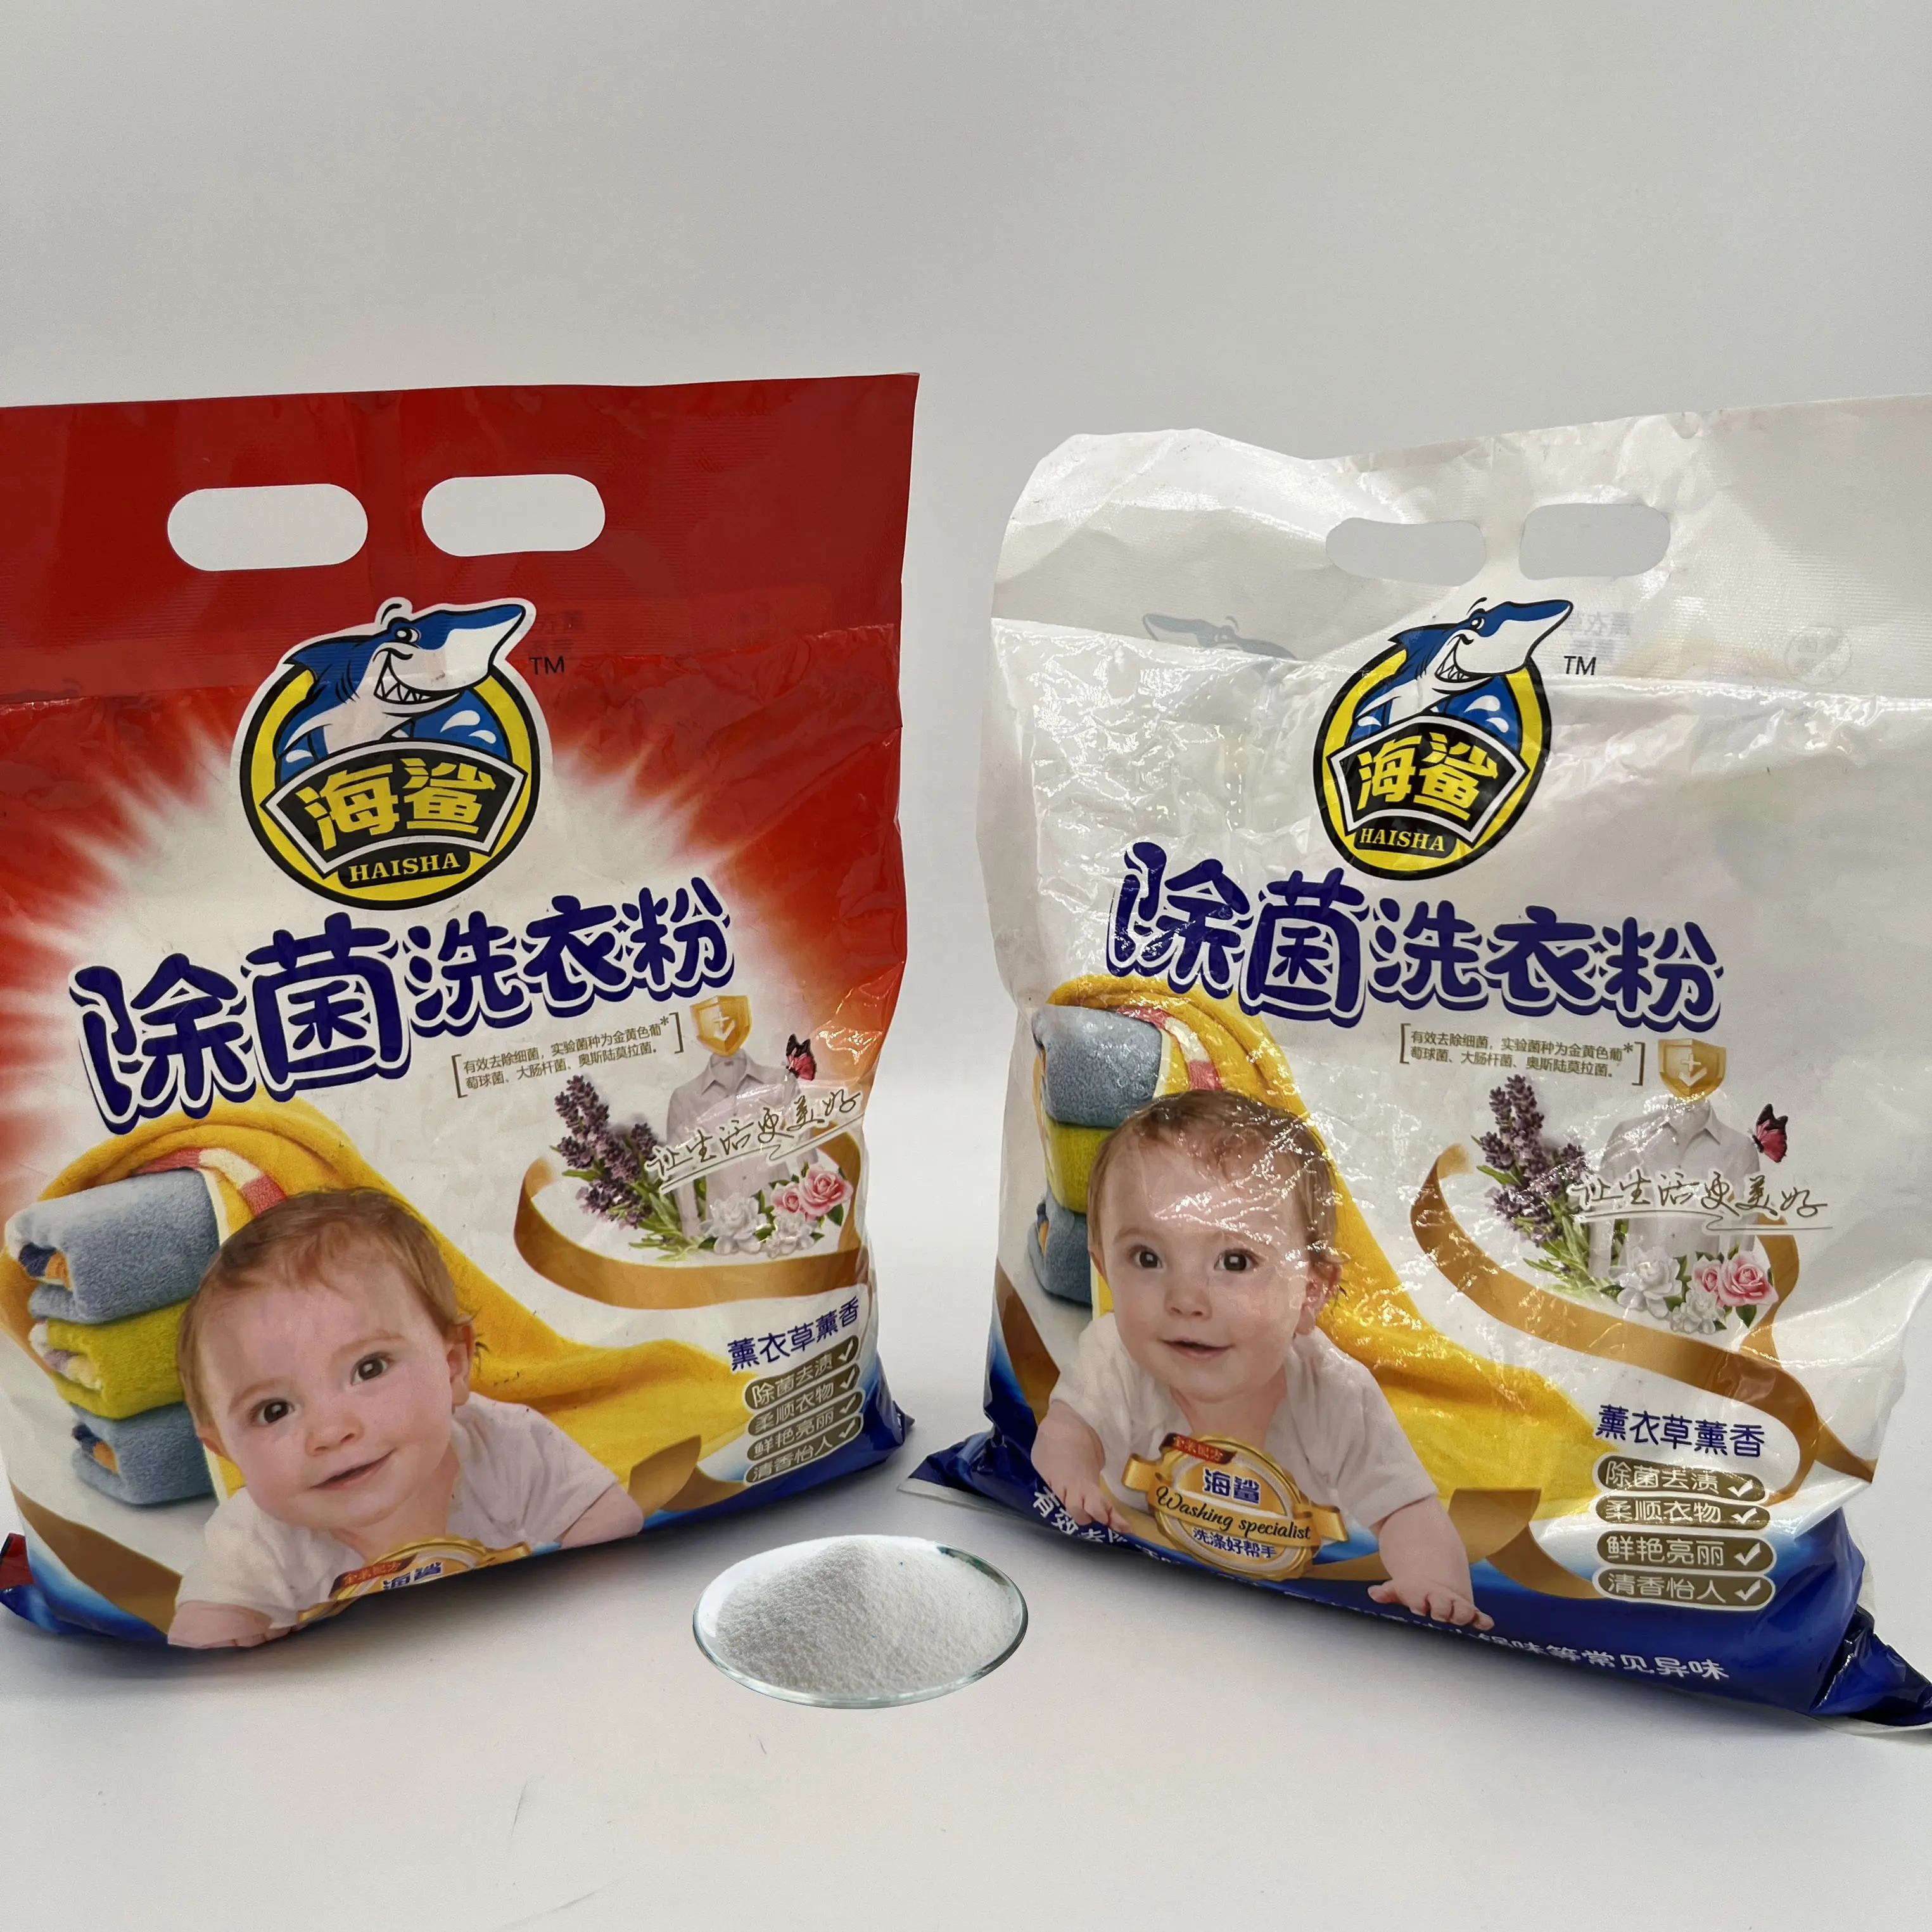 Hot Sale Baby Use Laundry Detergent Washing Powder 508g/20 bags